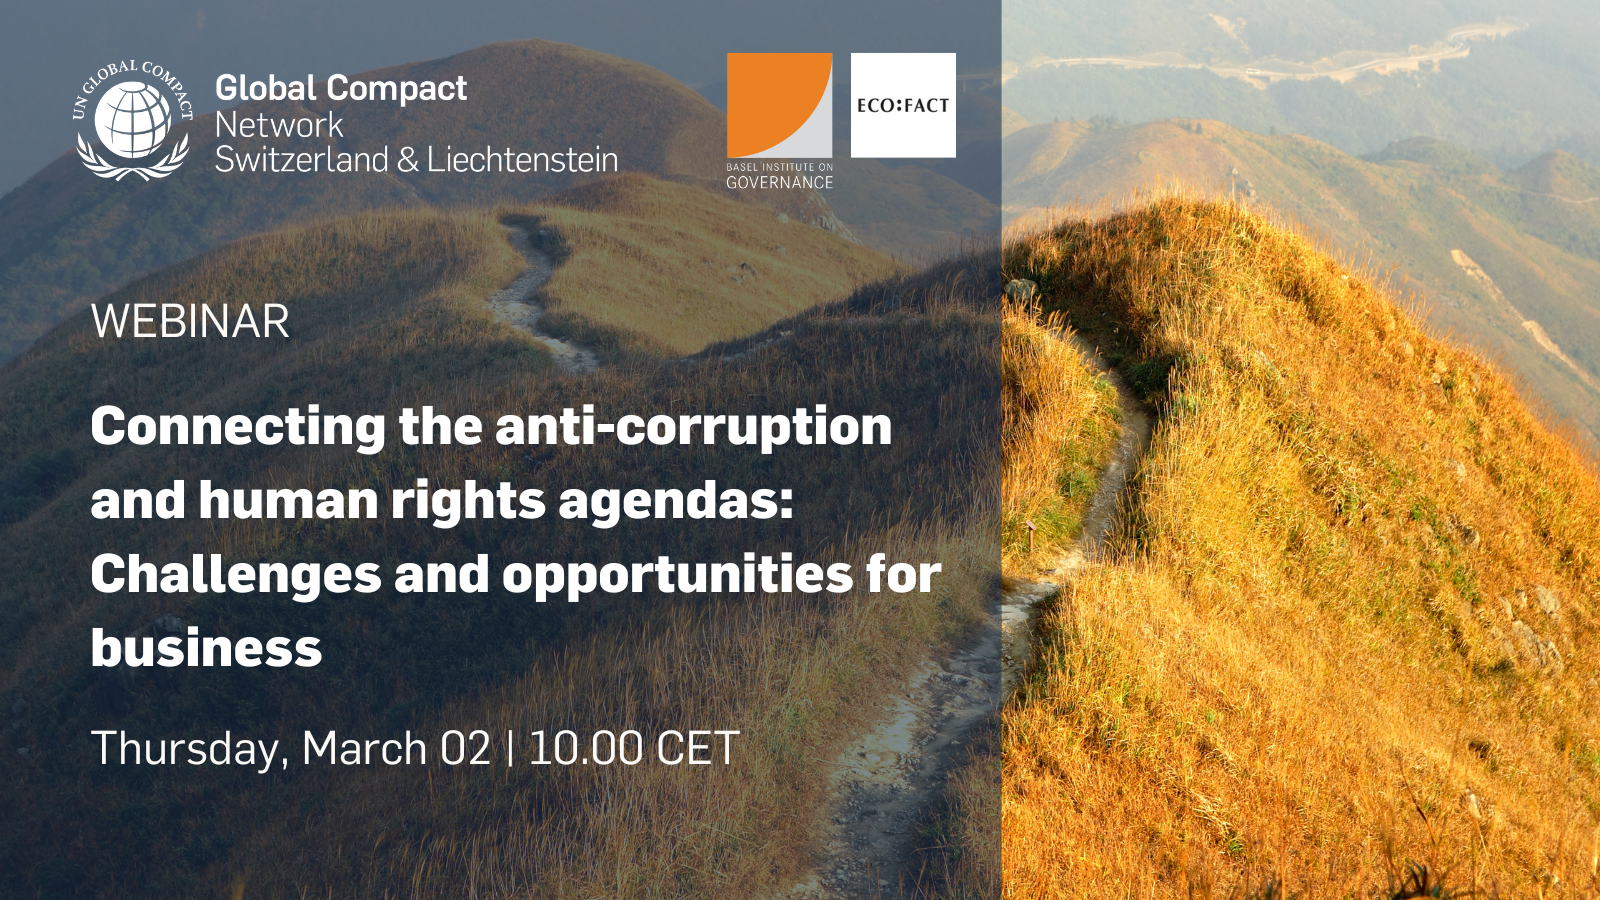 Join this webinar about the opportunities and challenges of anti-corruption and human rights agendas for businesses.